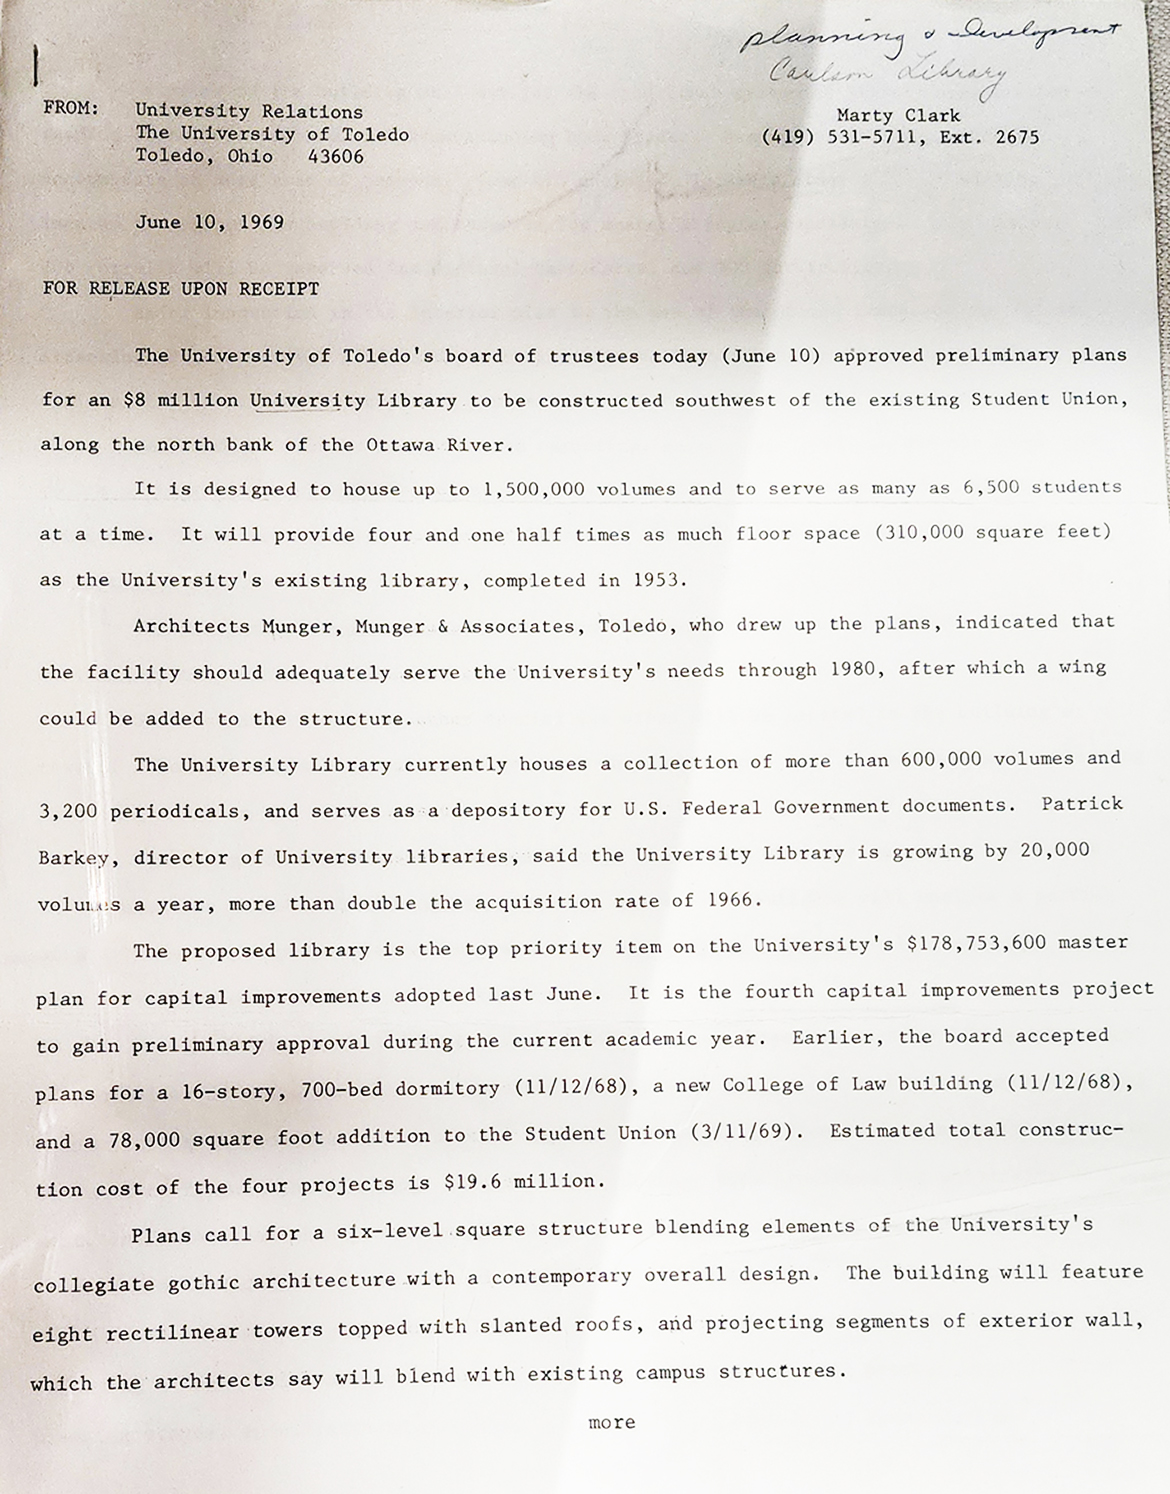 Press release about the approval of funds for new library consturction, June 10, 1969